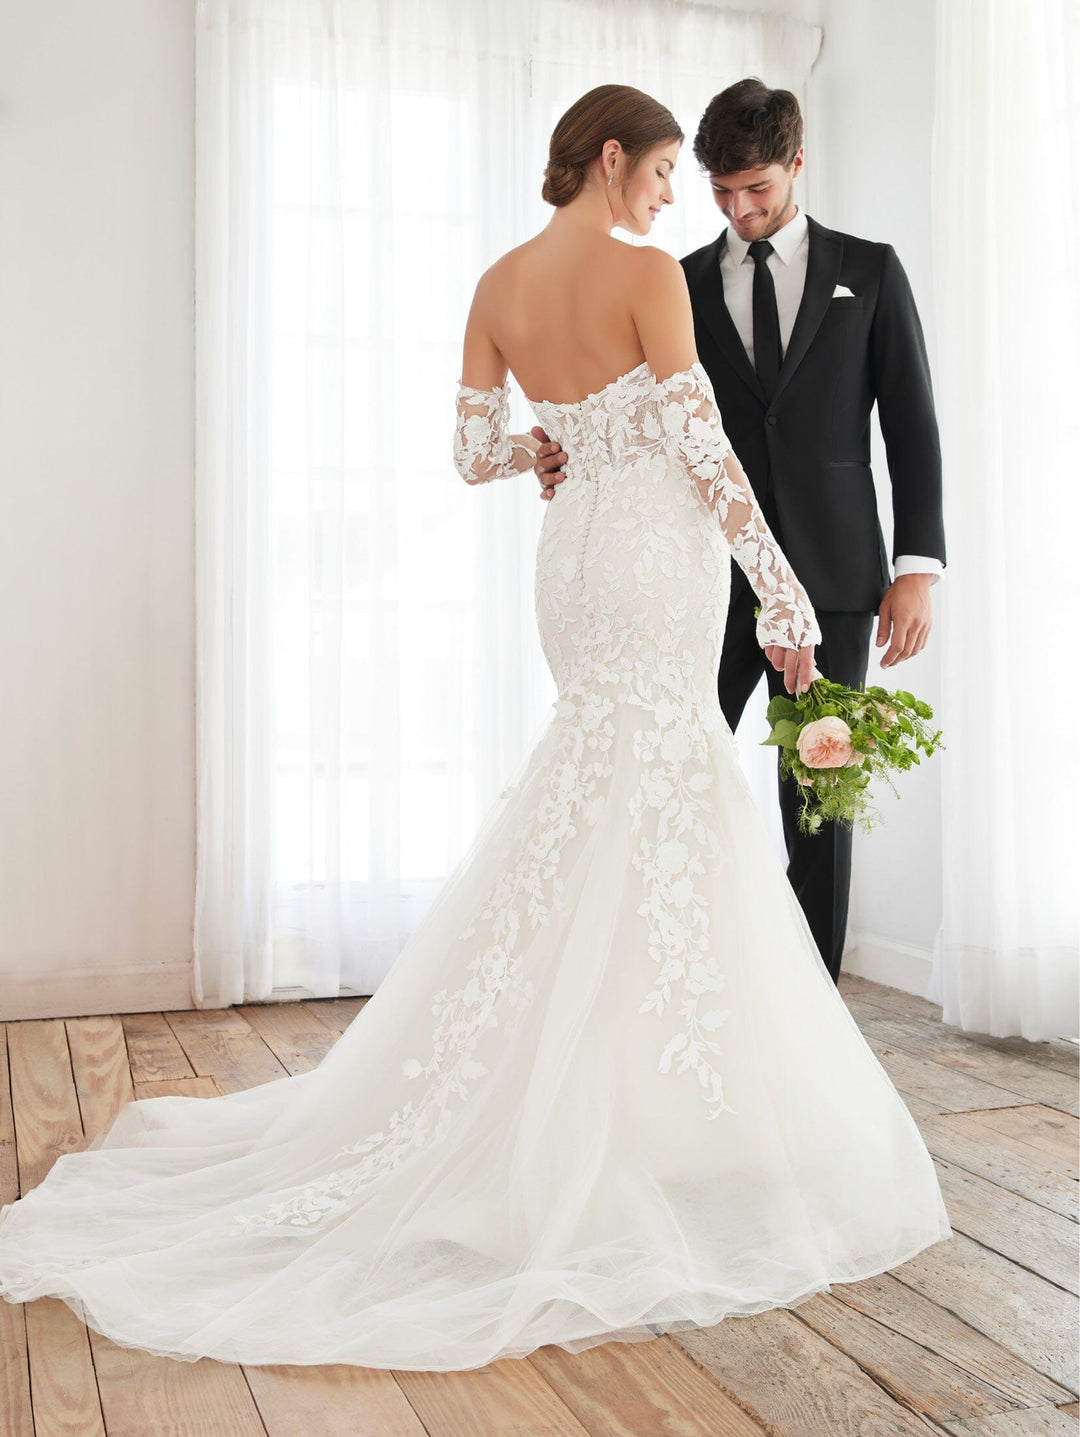 Strapless Long Sleeve Bridal Gown by Adrianna Papell 31247